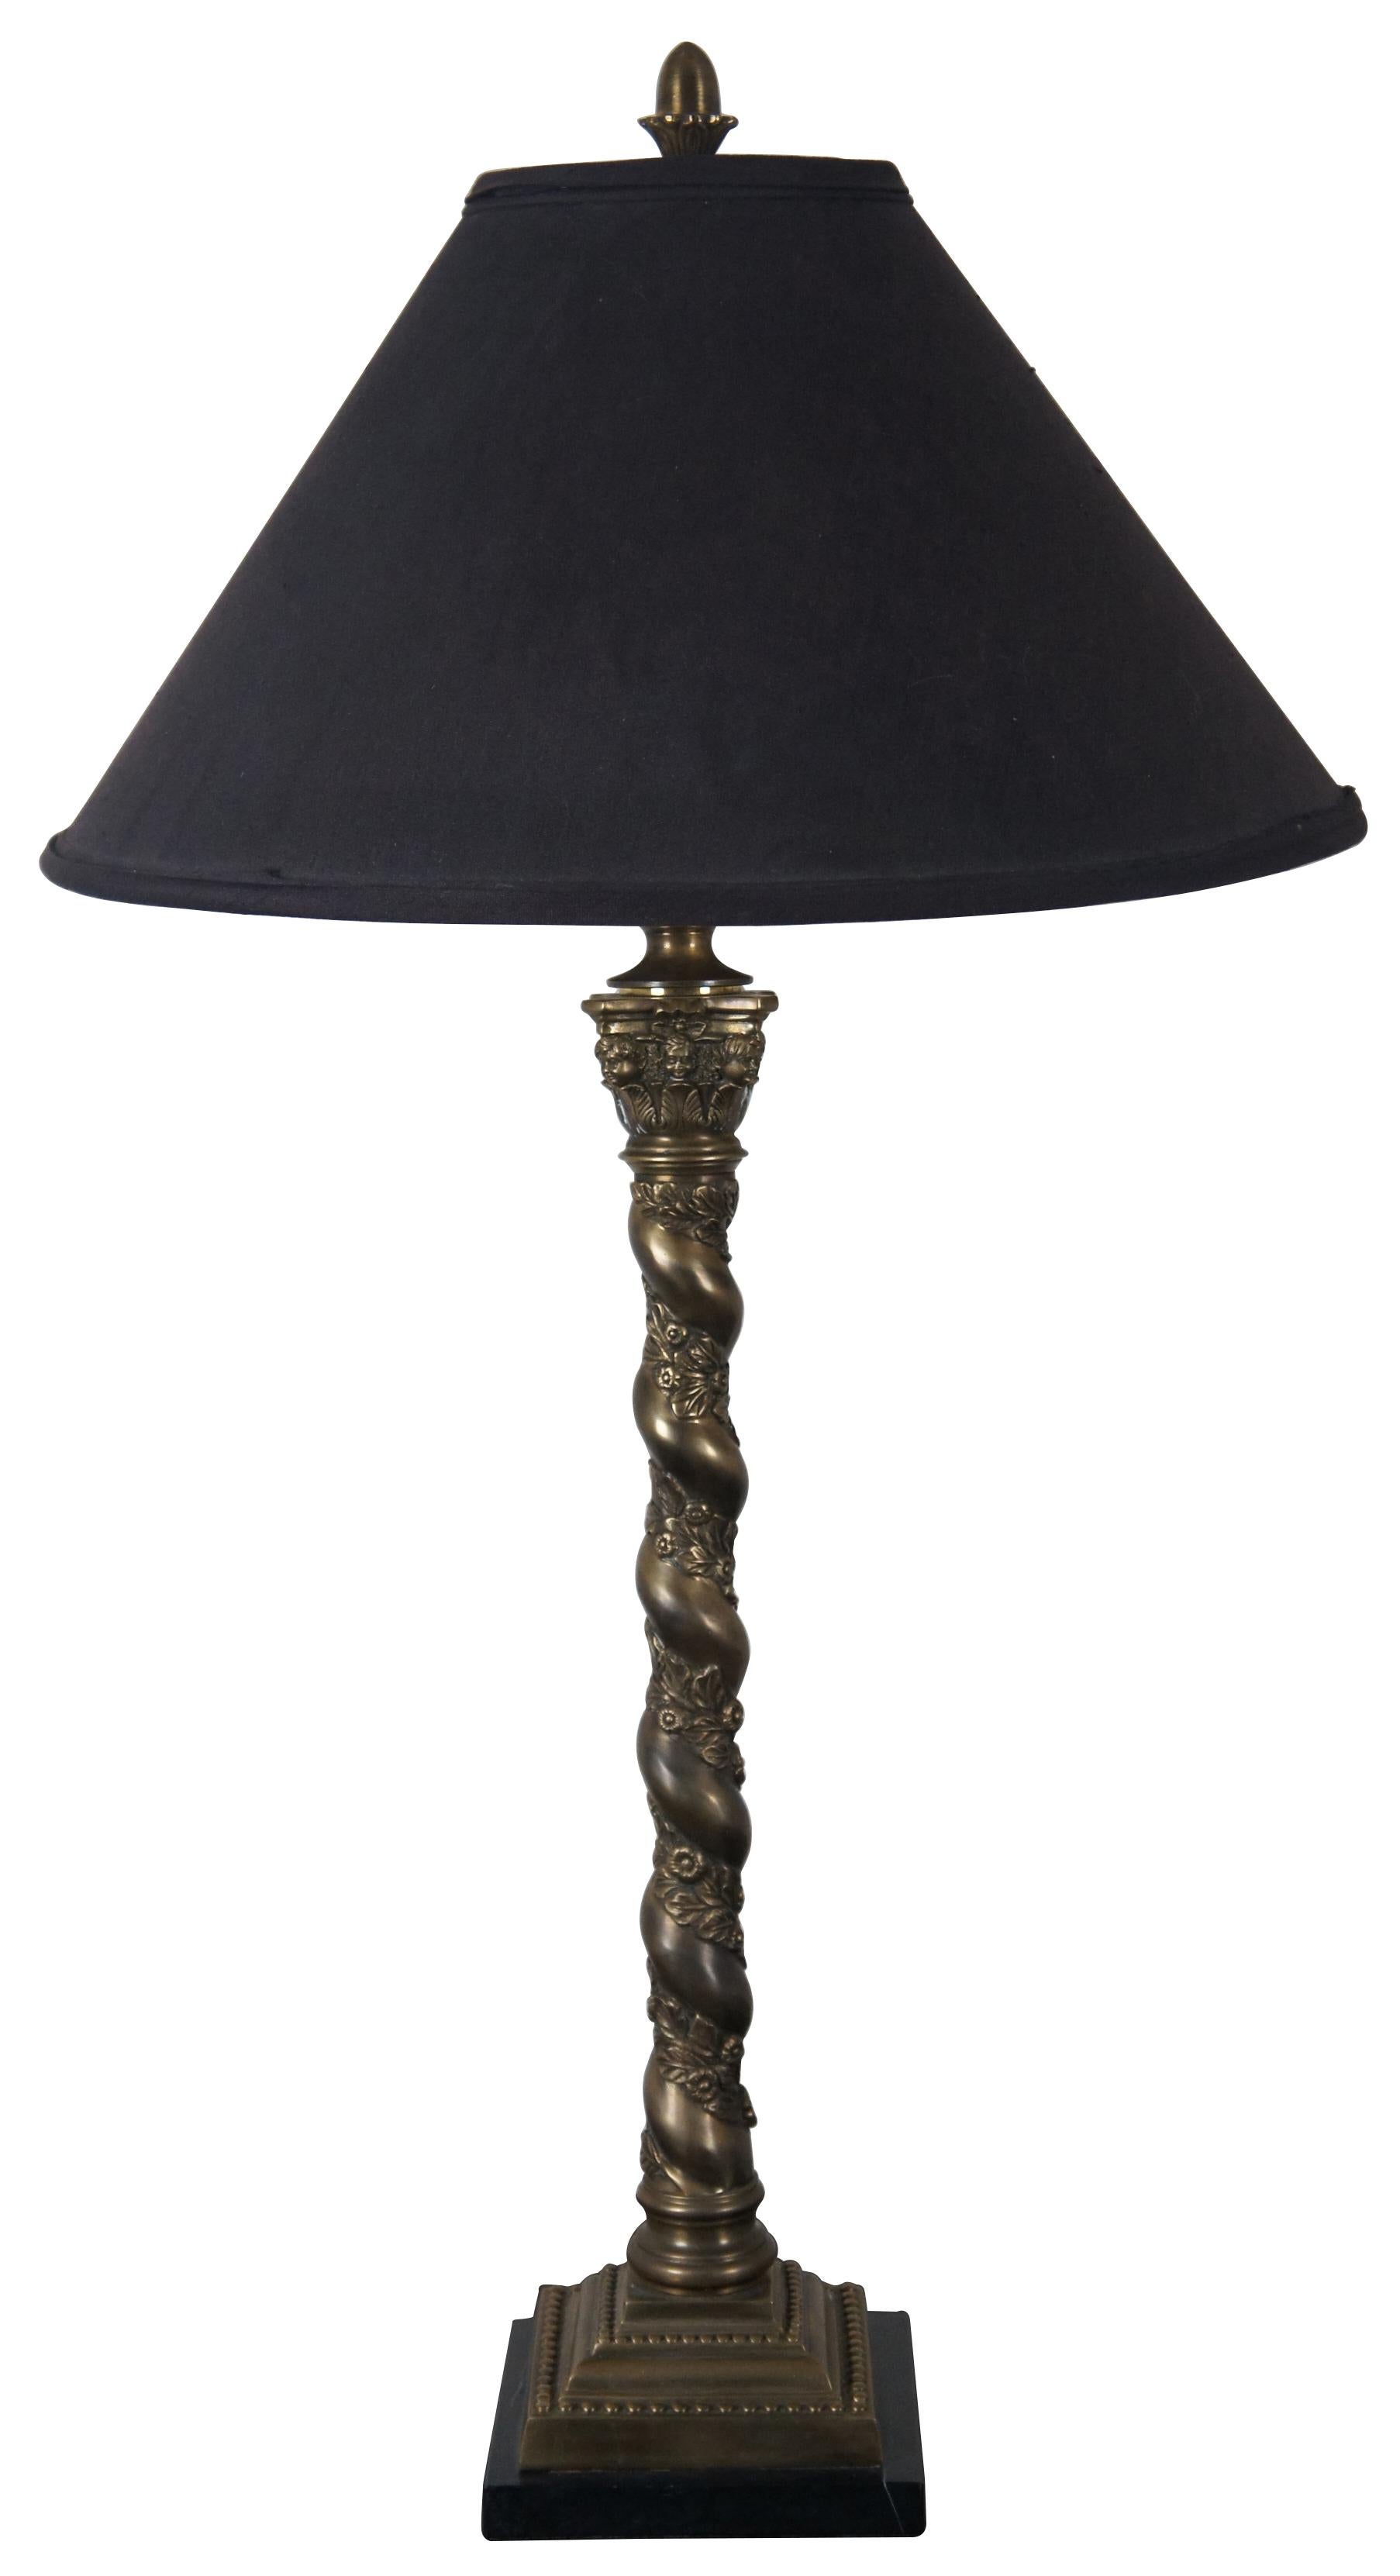 Vintage bronze barley twist lamp pair attributed to Theodore Alexander. Features Corinthian columns with cherubs or pooties on marble base with acorn finials and floral motif. Very heavy.

Measures: Shade - 20” x 10” / Height to top of finial –